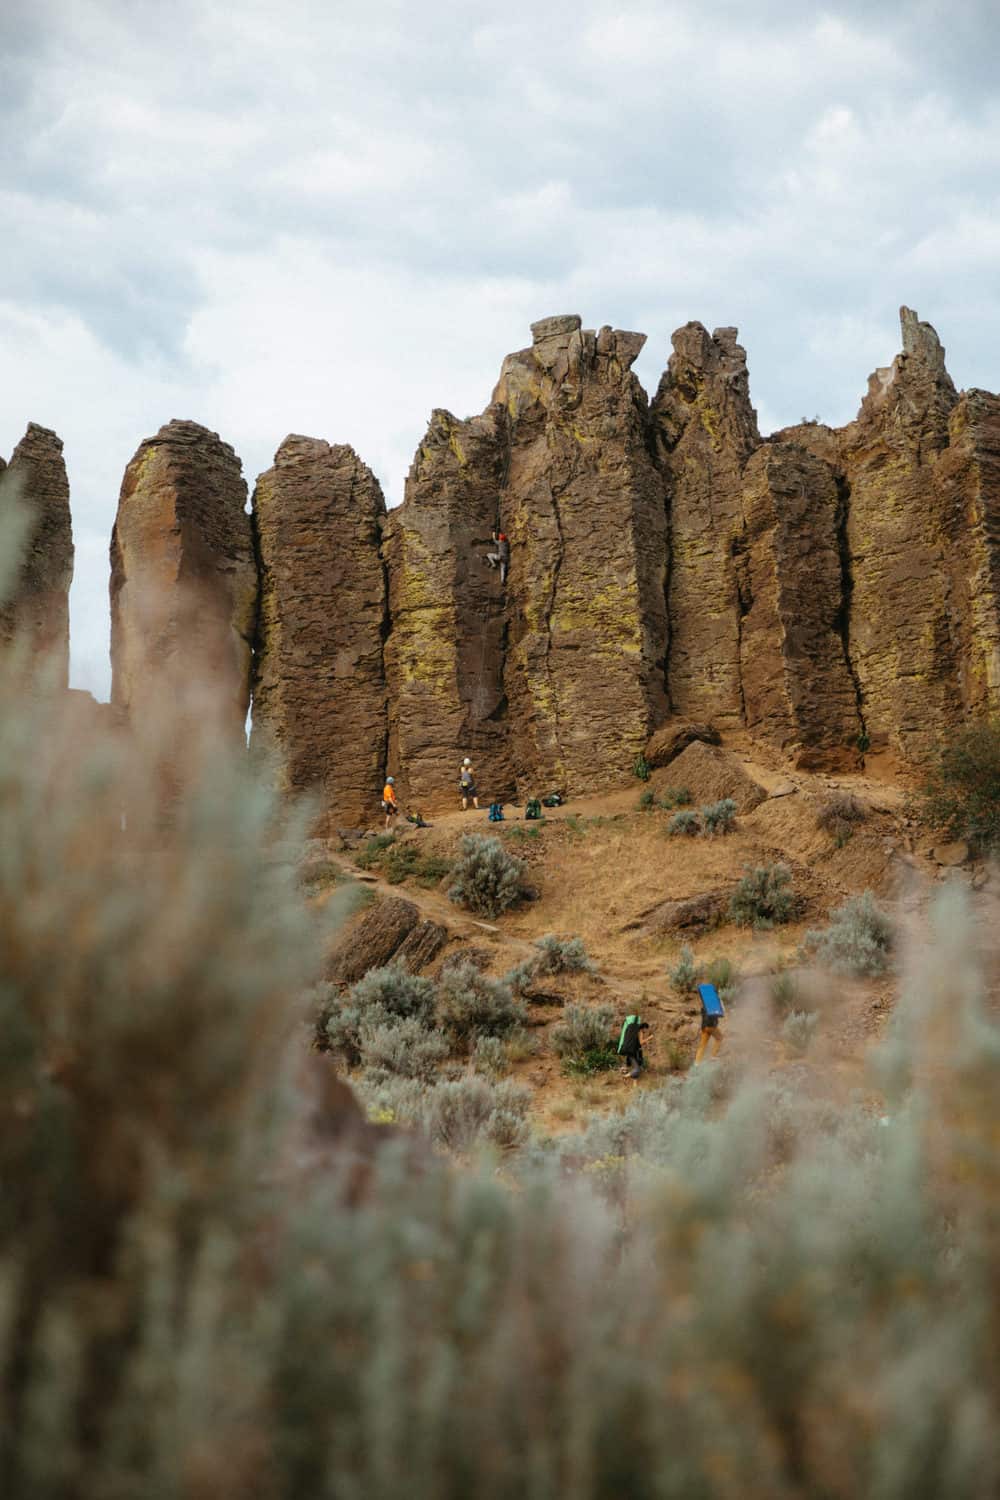 Climbers at The Feathers in Central Washington